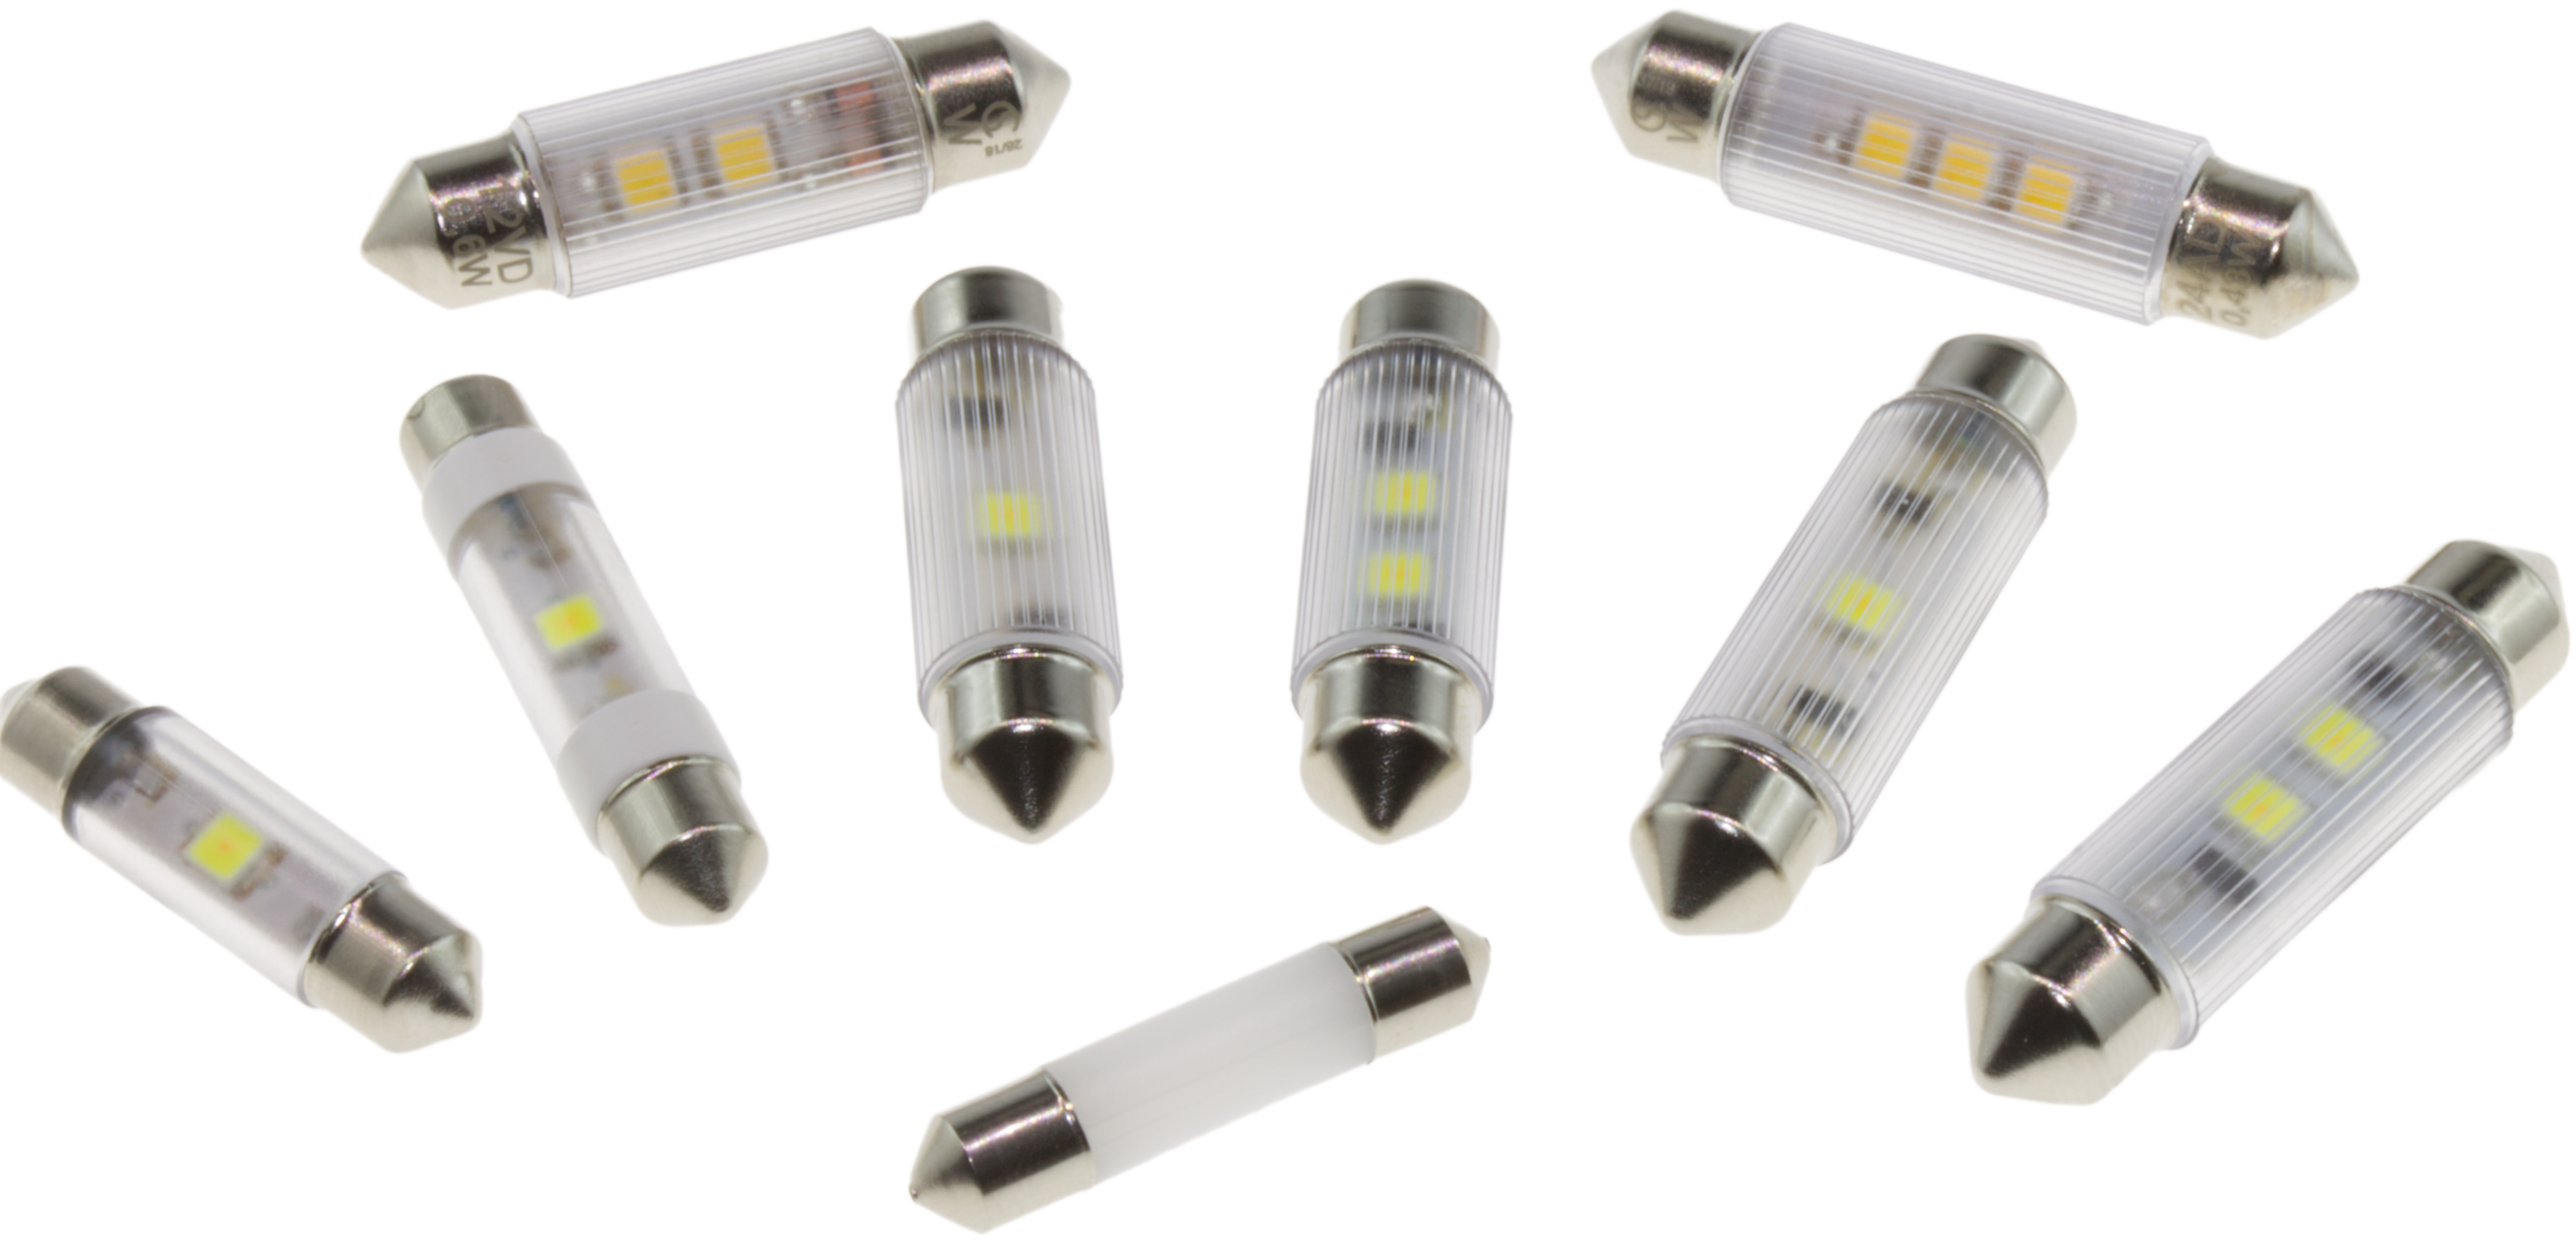 LED-based festoon lamps in the dimensions Ø 6 x 31 and 6 x 39 mm,  Signal-Construct elektro-optische Anzeigen und Systeme GmbH, Story -  PresseBox